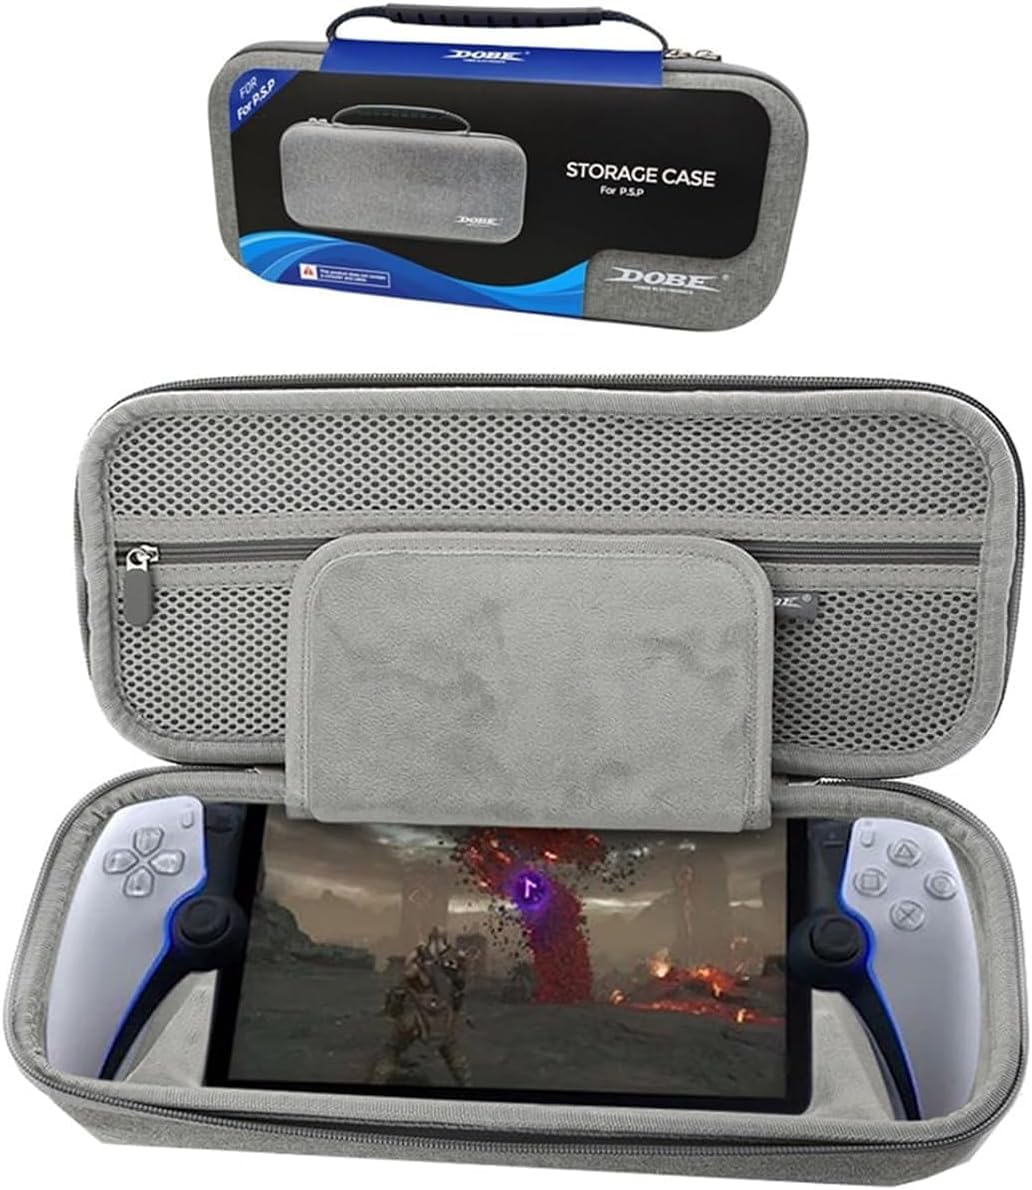 New World Carrying Travel Storage Case Compatible with Playstation Portal Remote Player, Protective Cover Case for PS5 Portal-Shockproof Anti-Scratch, Playstation Portal Accessories – Gray